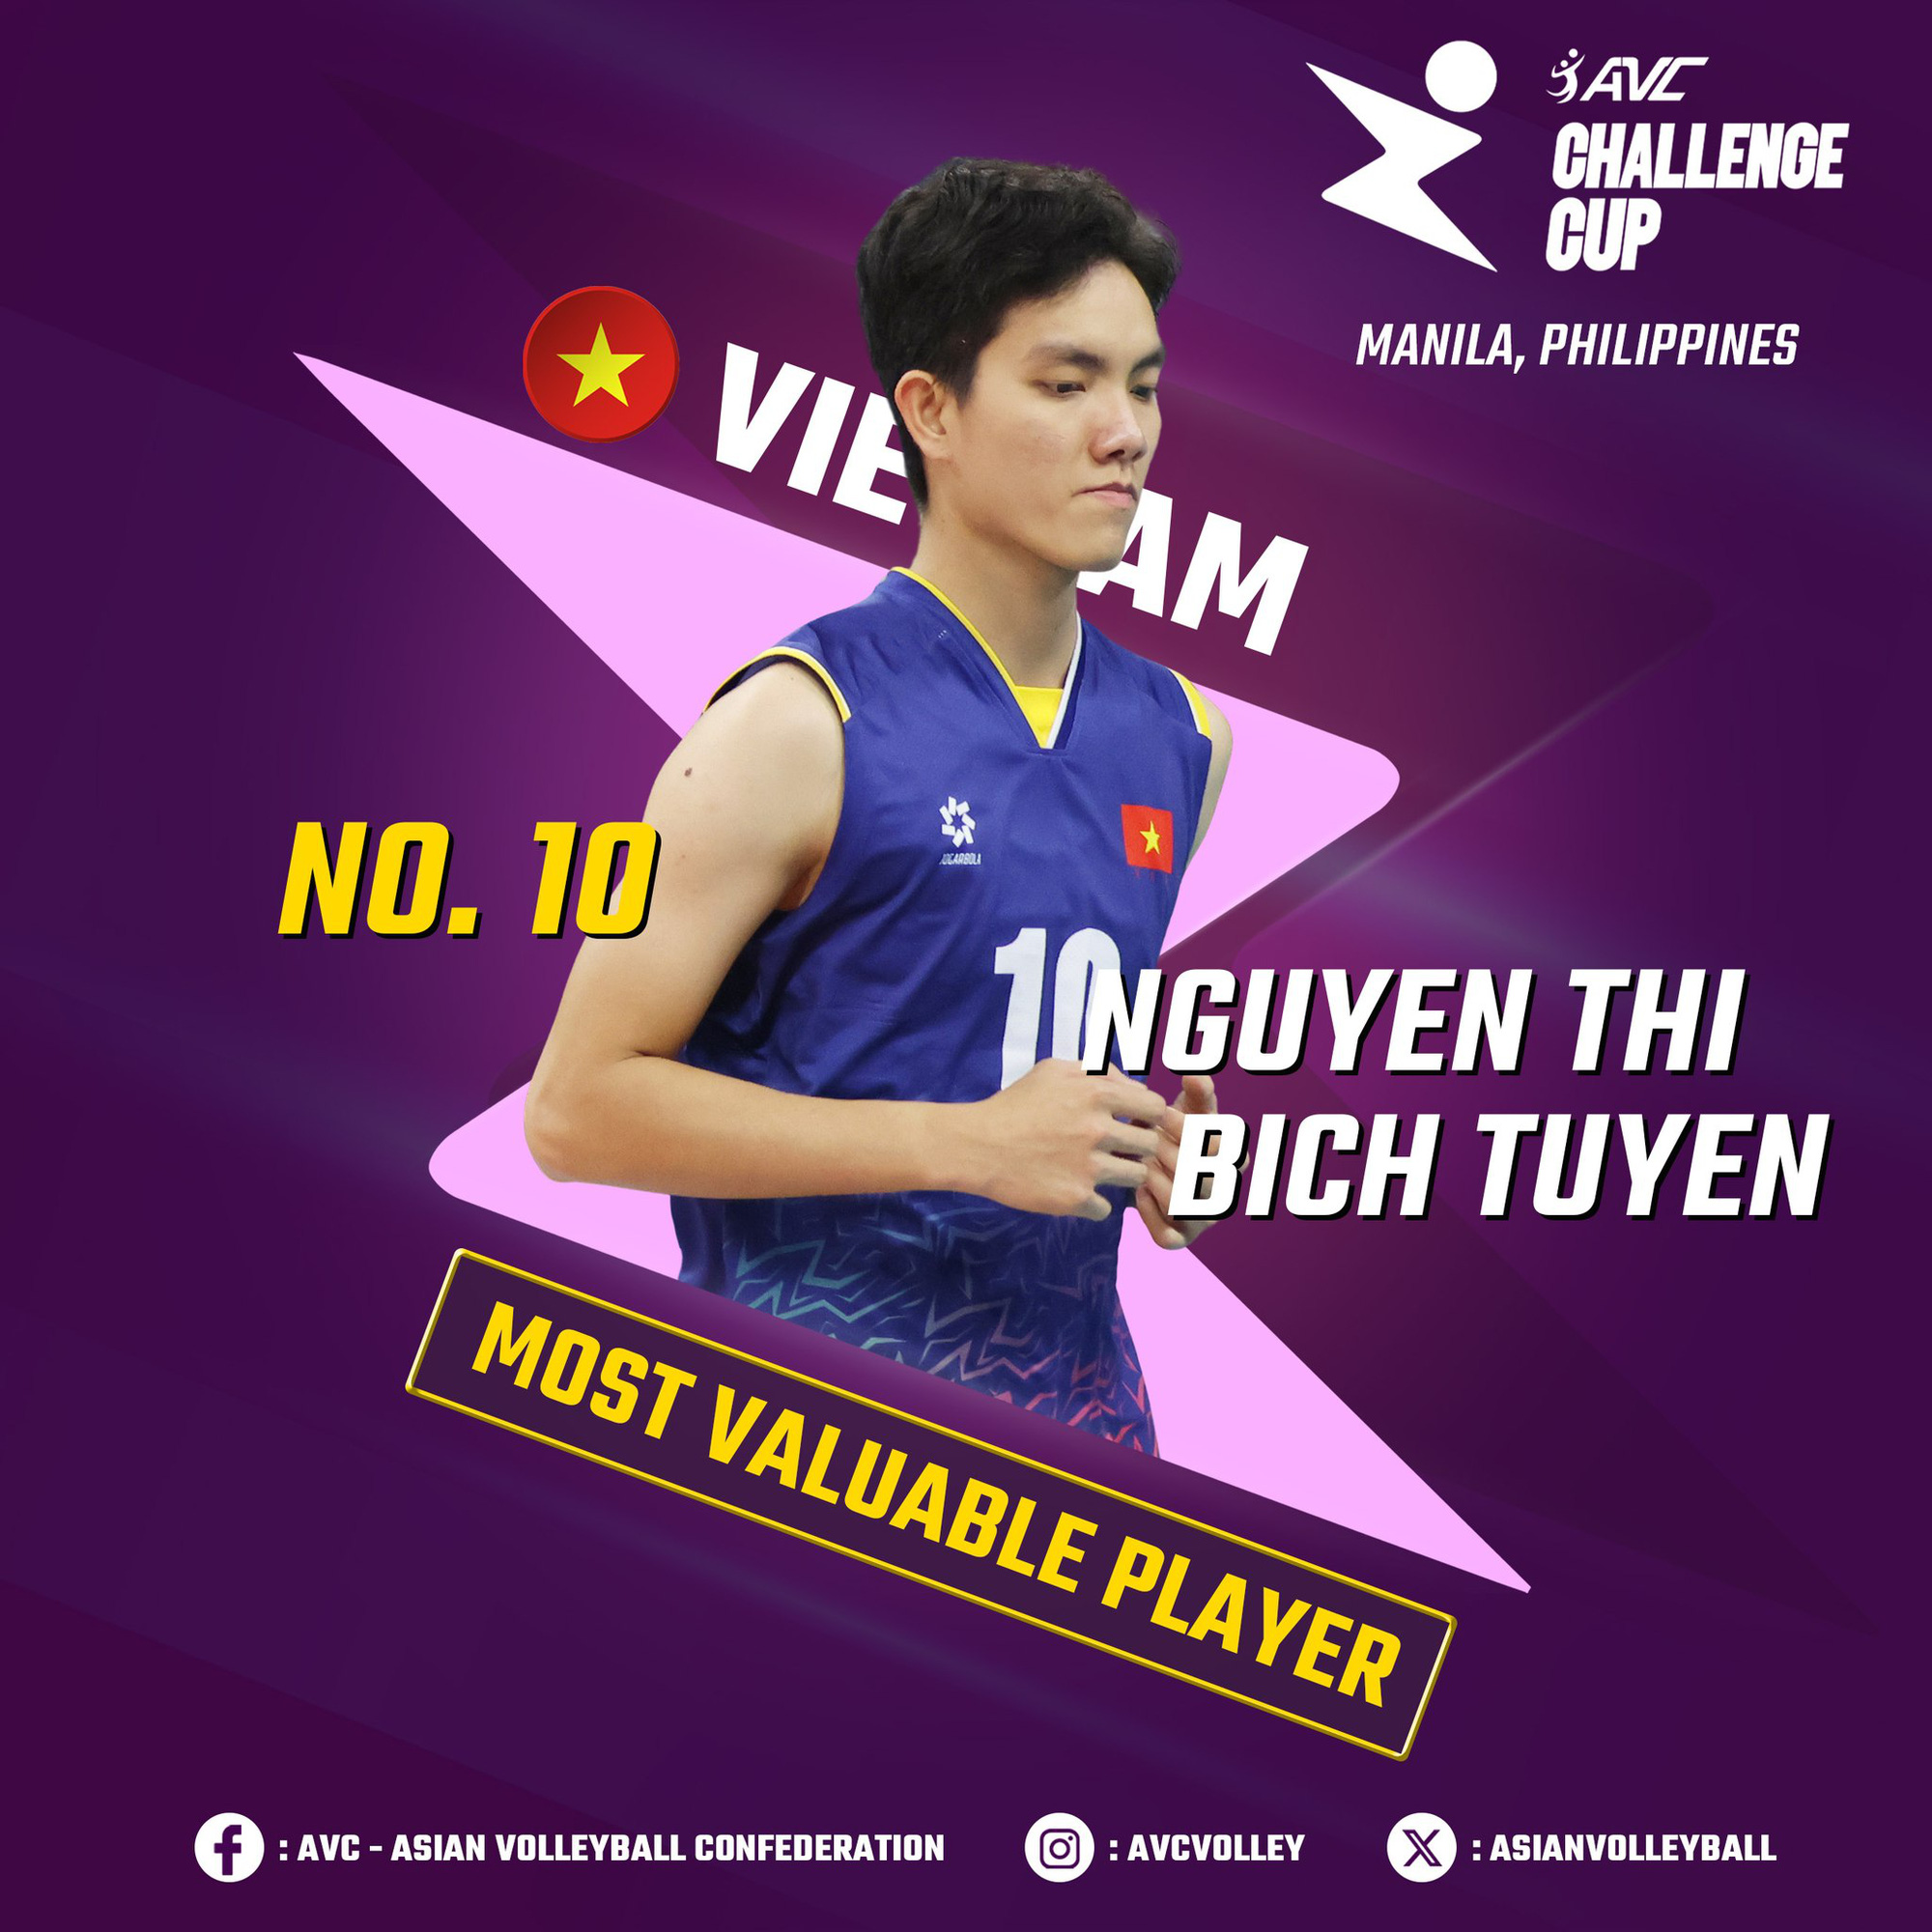 Vietnamese player Nguyen Thi Bich Tuyen is crowned the Most Valuable Player of the 2024 Asian Volleyball Confederation Challenge Cup in the Philippines, May 29, 2024. Photo: Asian Volleyball Confederation